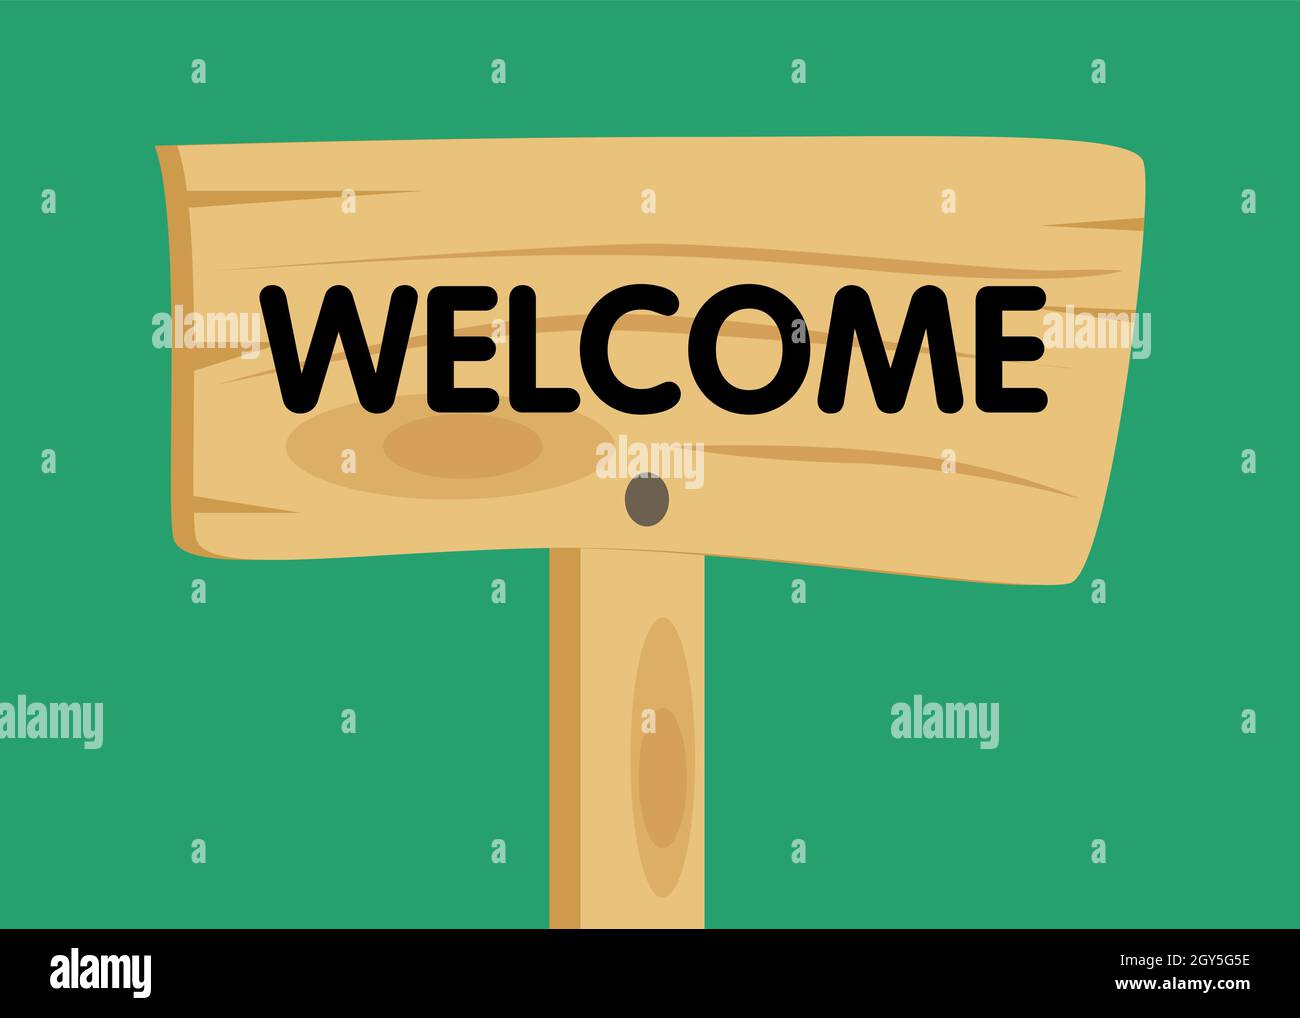 animated welcome sign